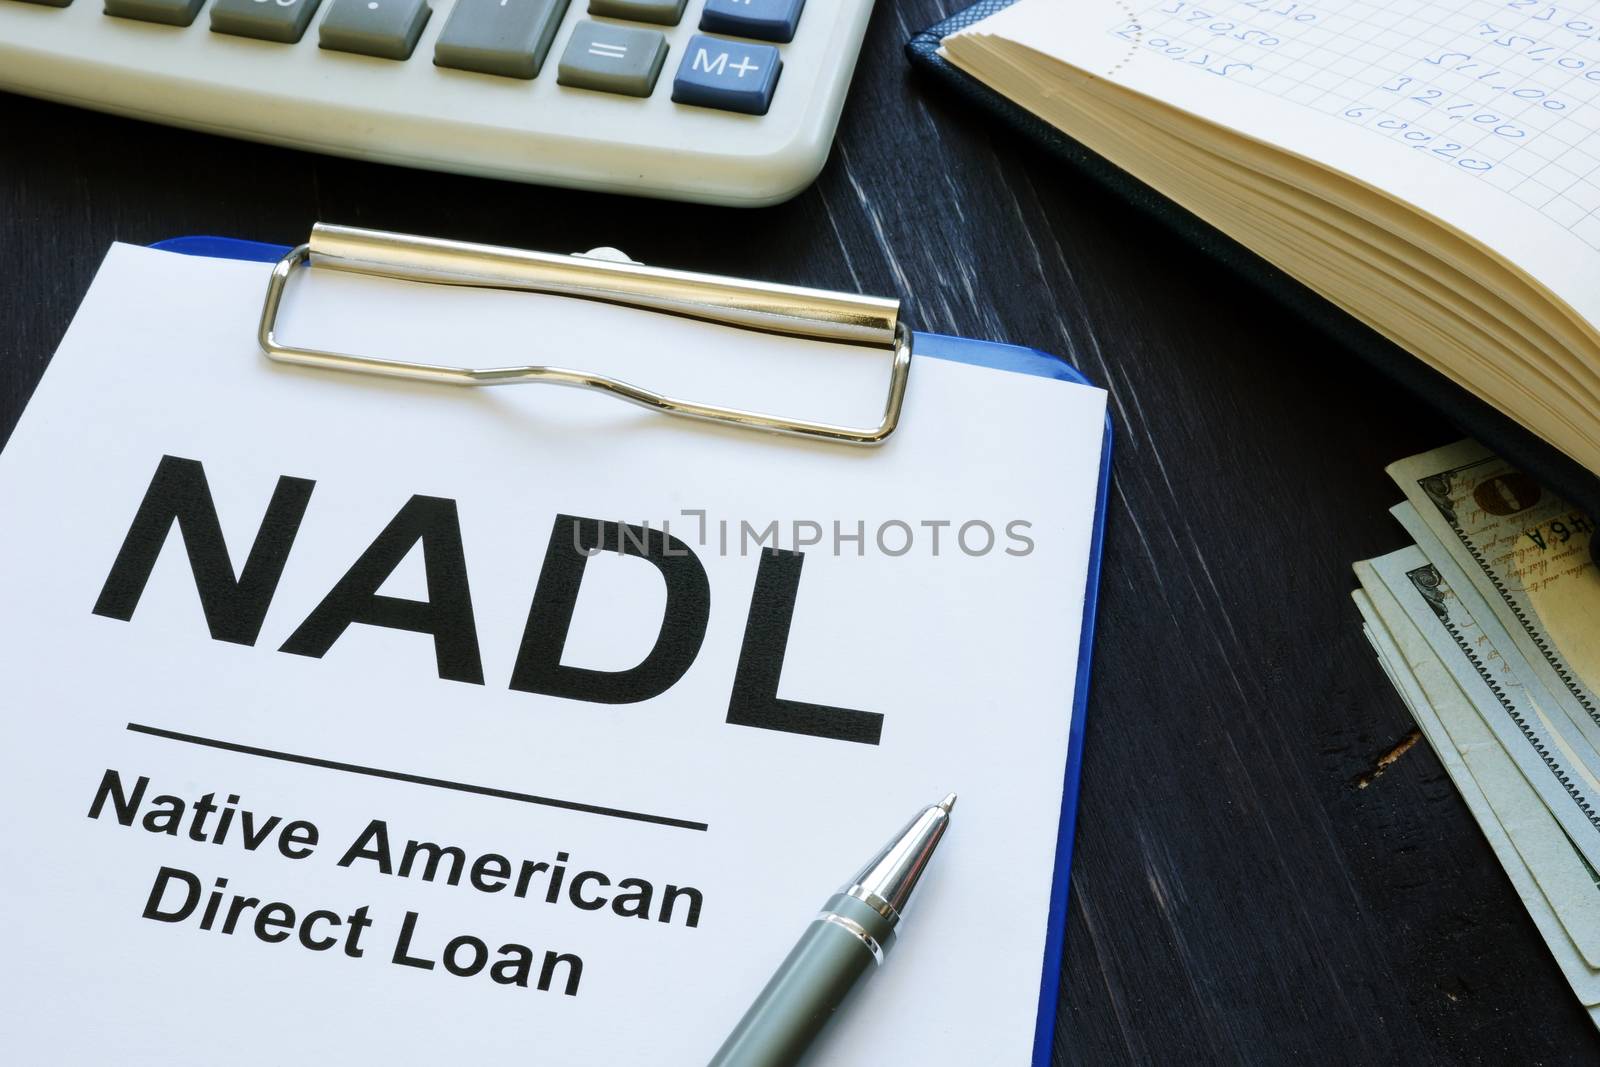 Direct loan NADL papers and clipboard.